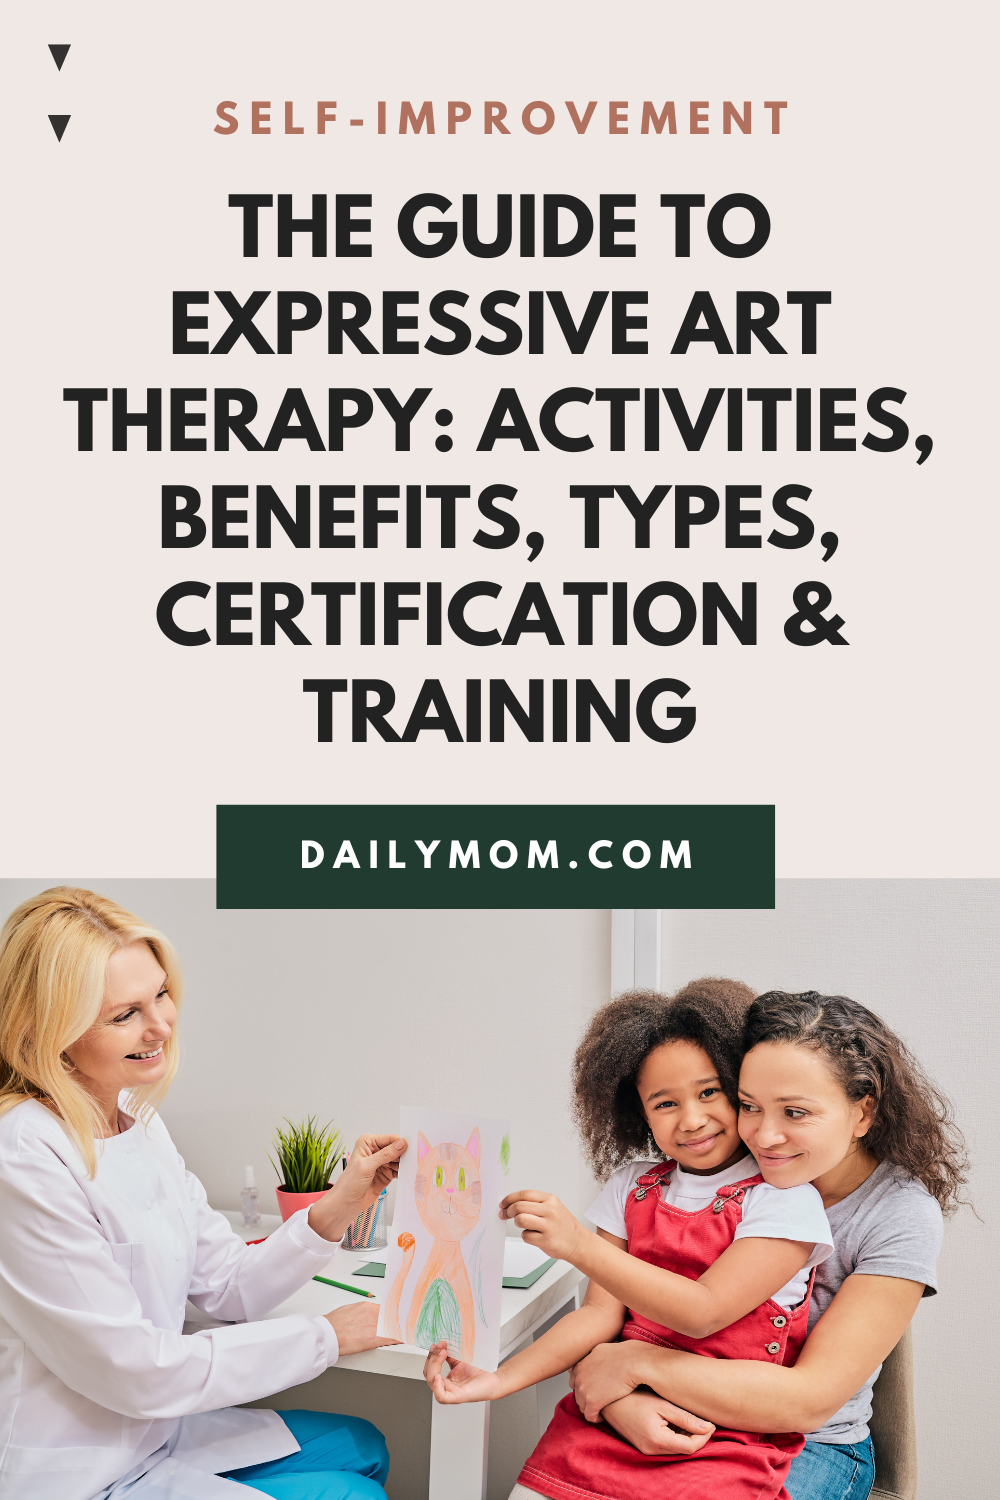 A Comprehensive Guide To Expressive Art Therapy: Activities, Benefits, Types, Certification & Training